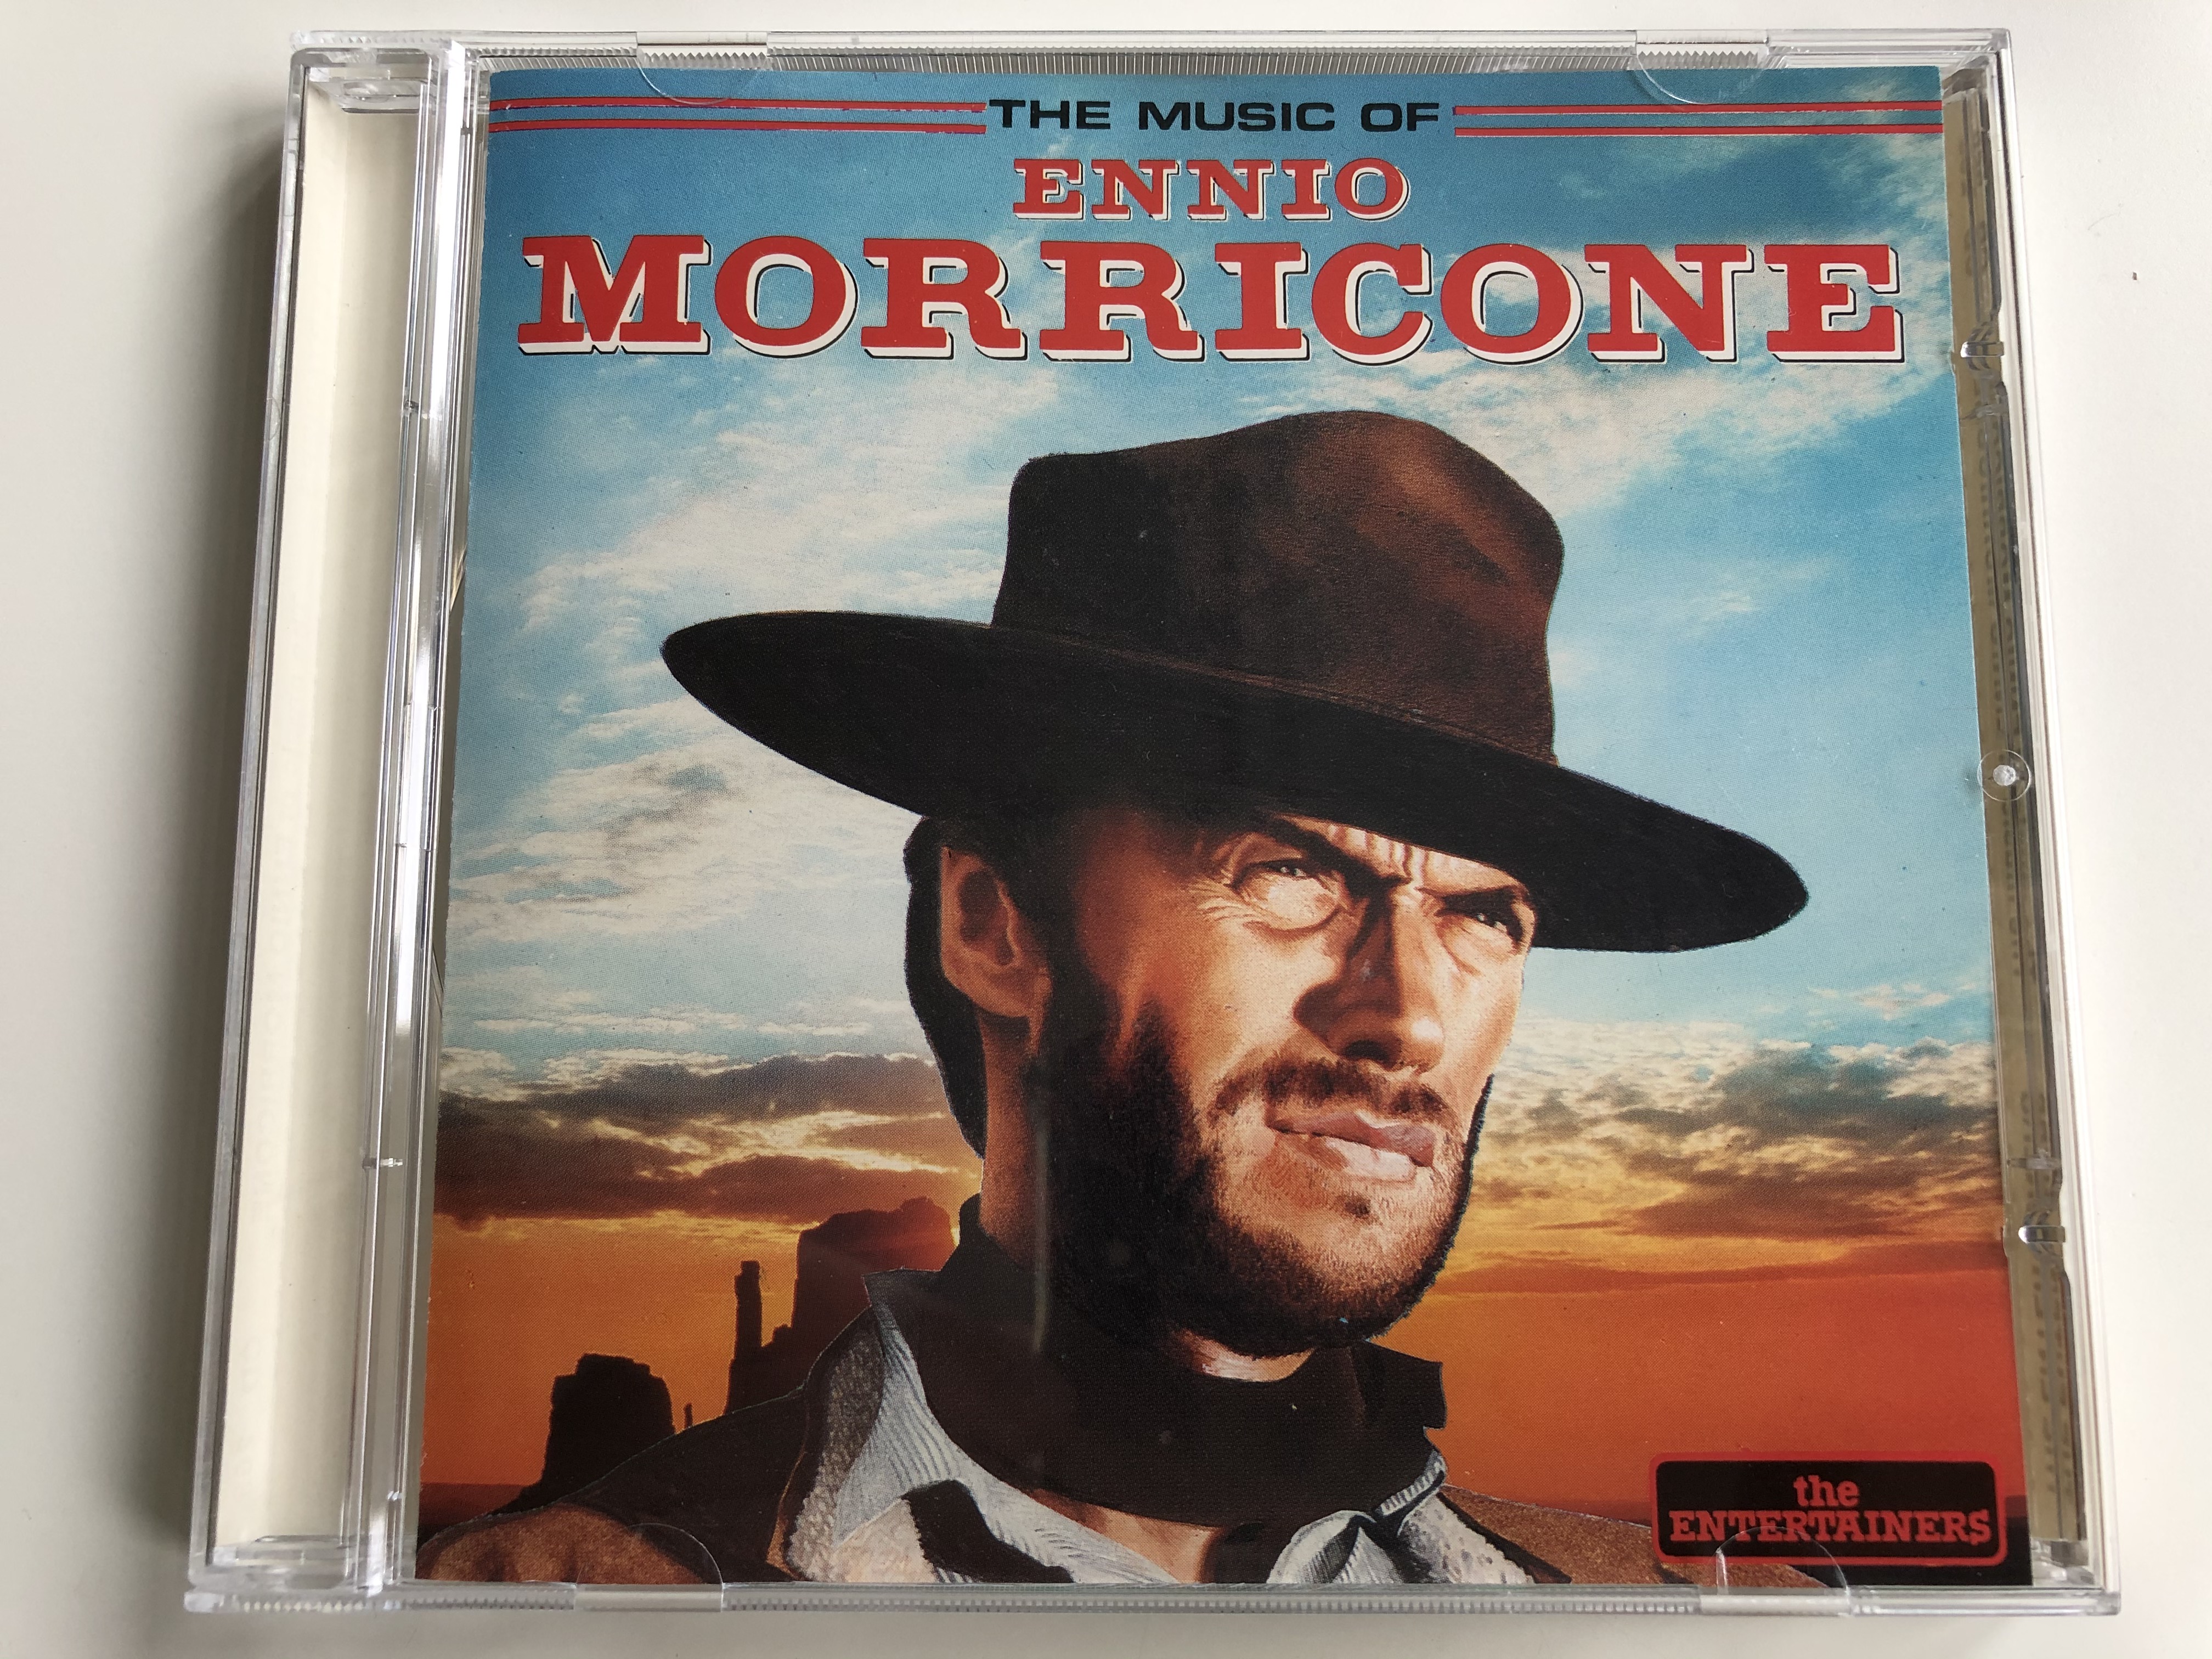 the-music-of-ennio-morricone-the-entertainers-audio-cd-1990-cd-269-1-.jpg